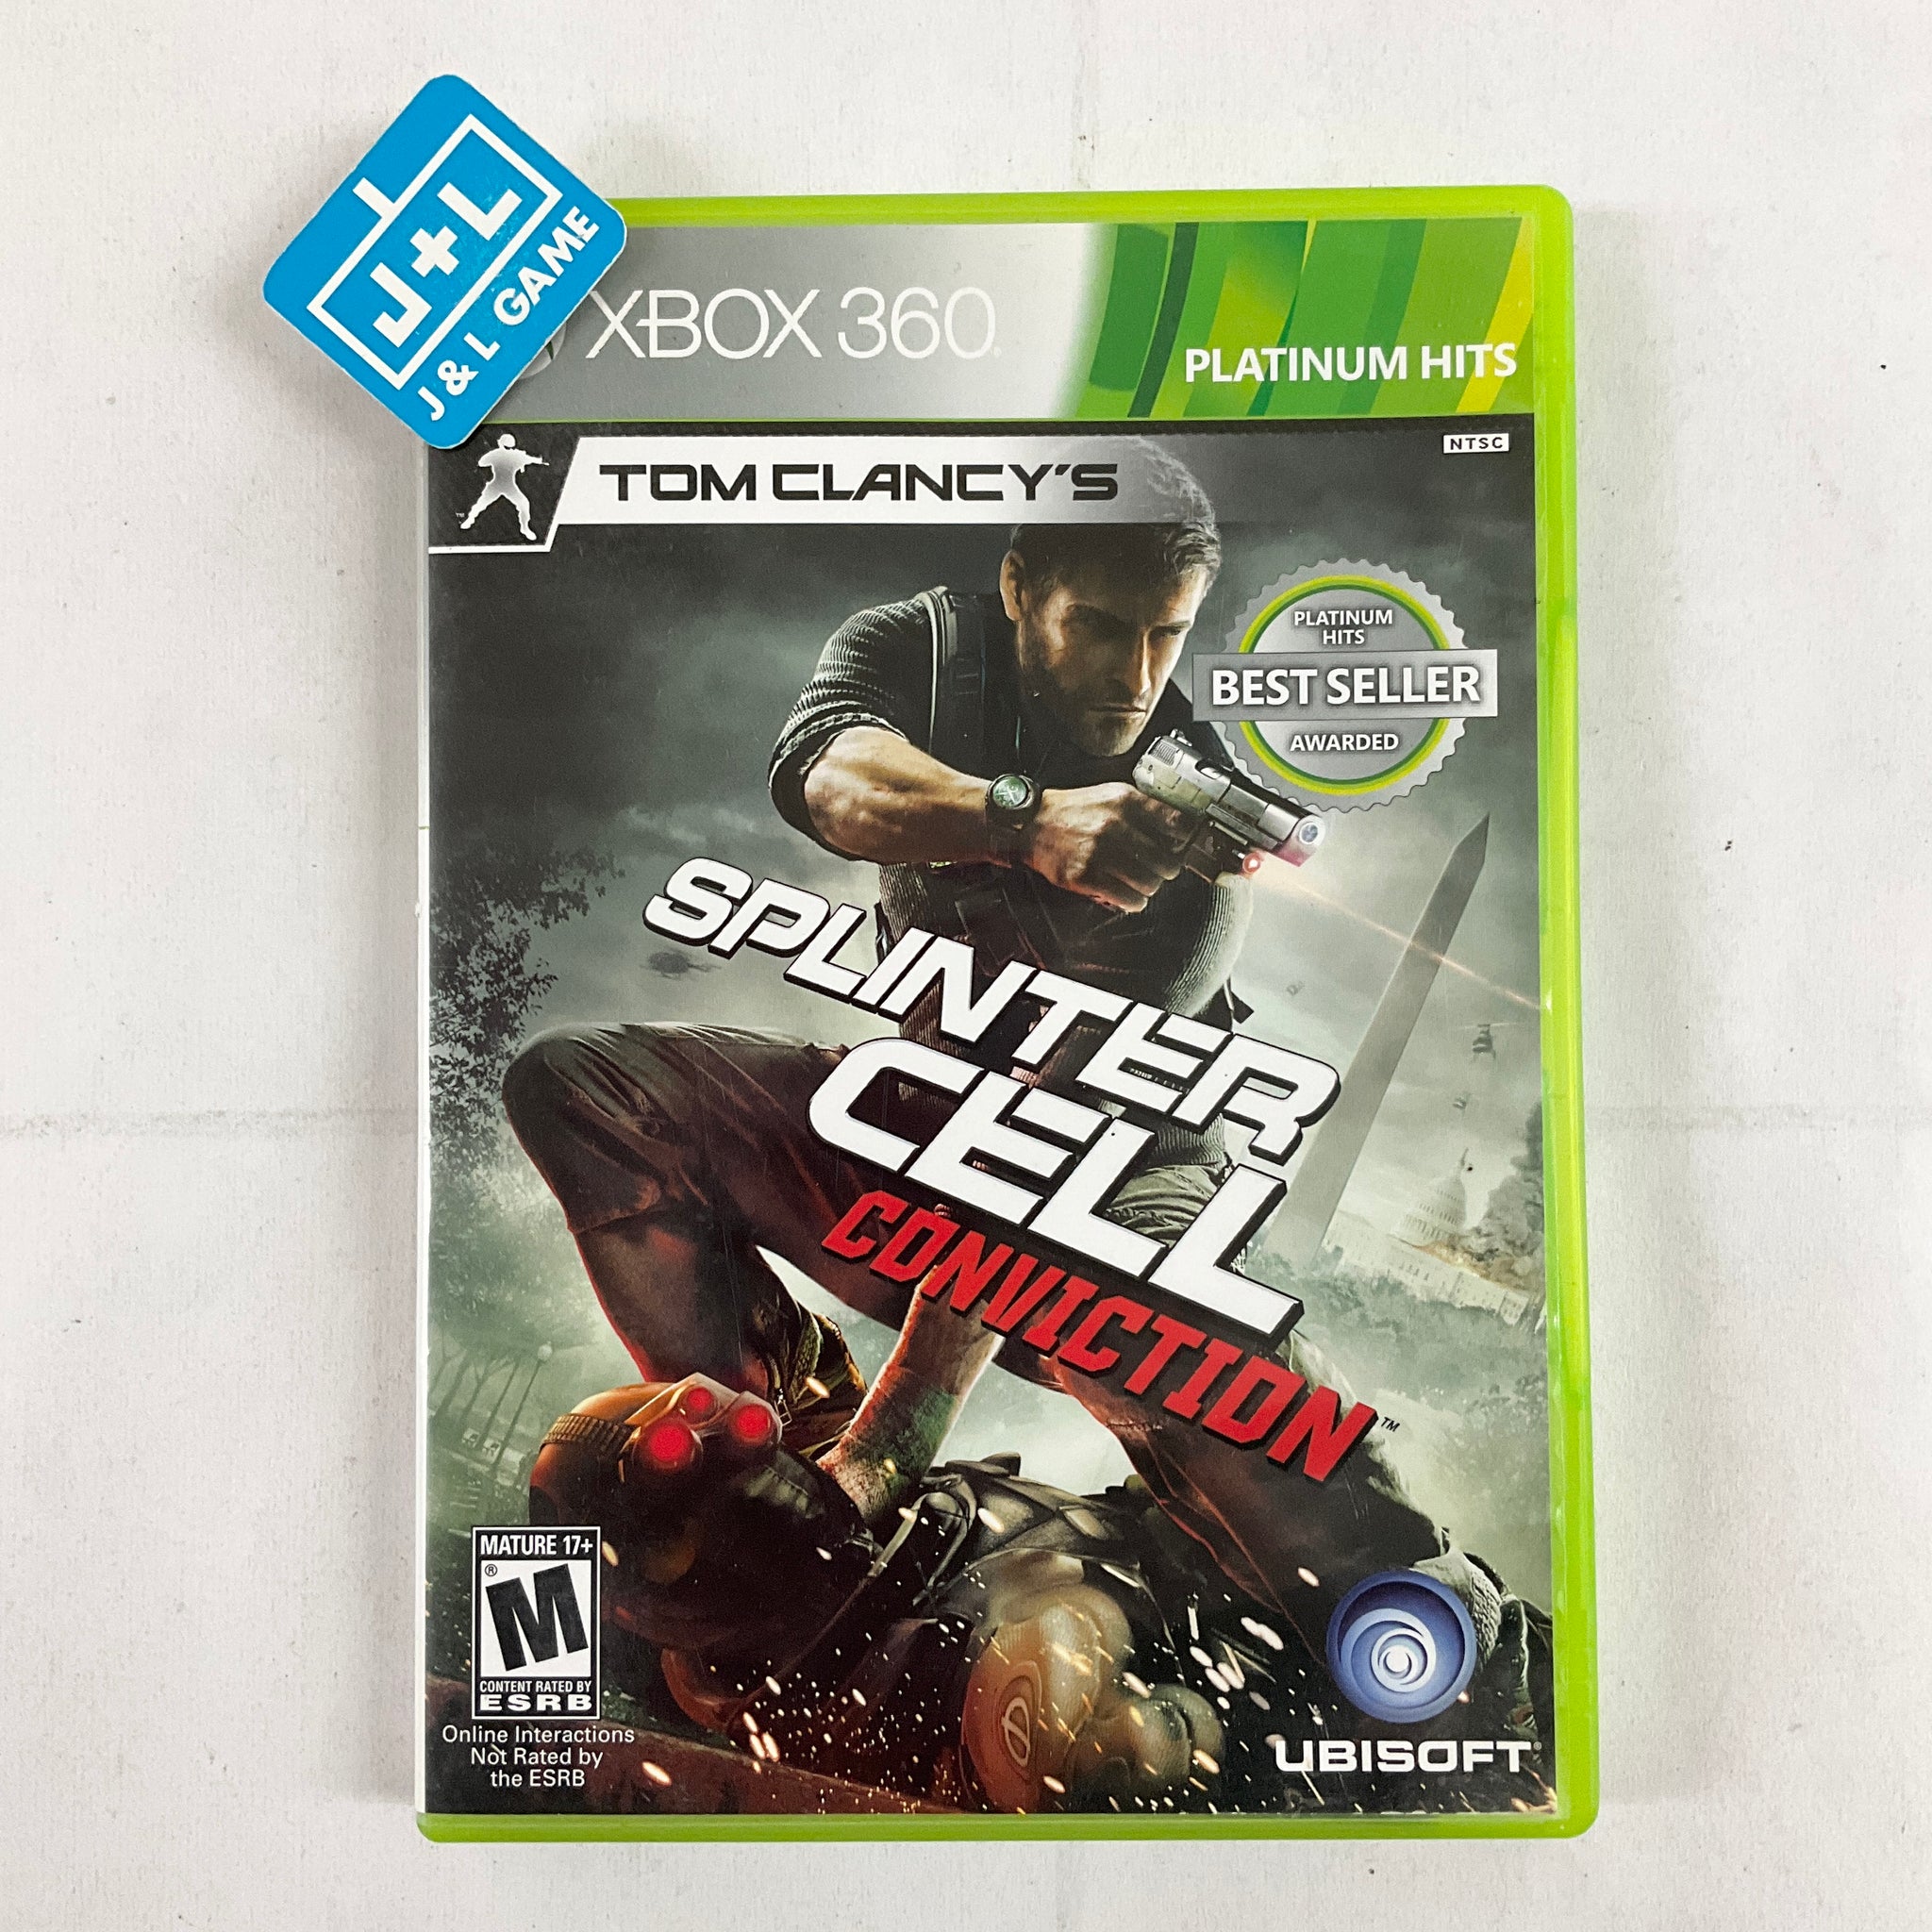 Entire Splinter Cell series discounted in latest Xbox sale